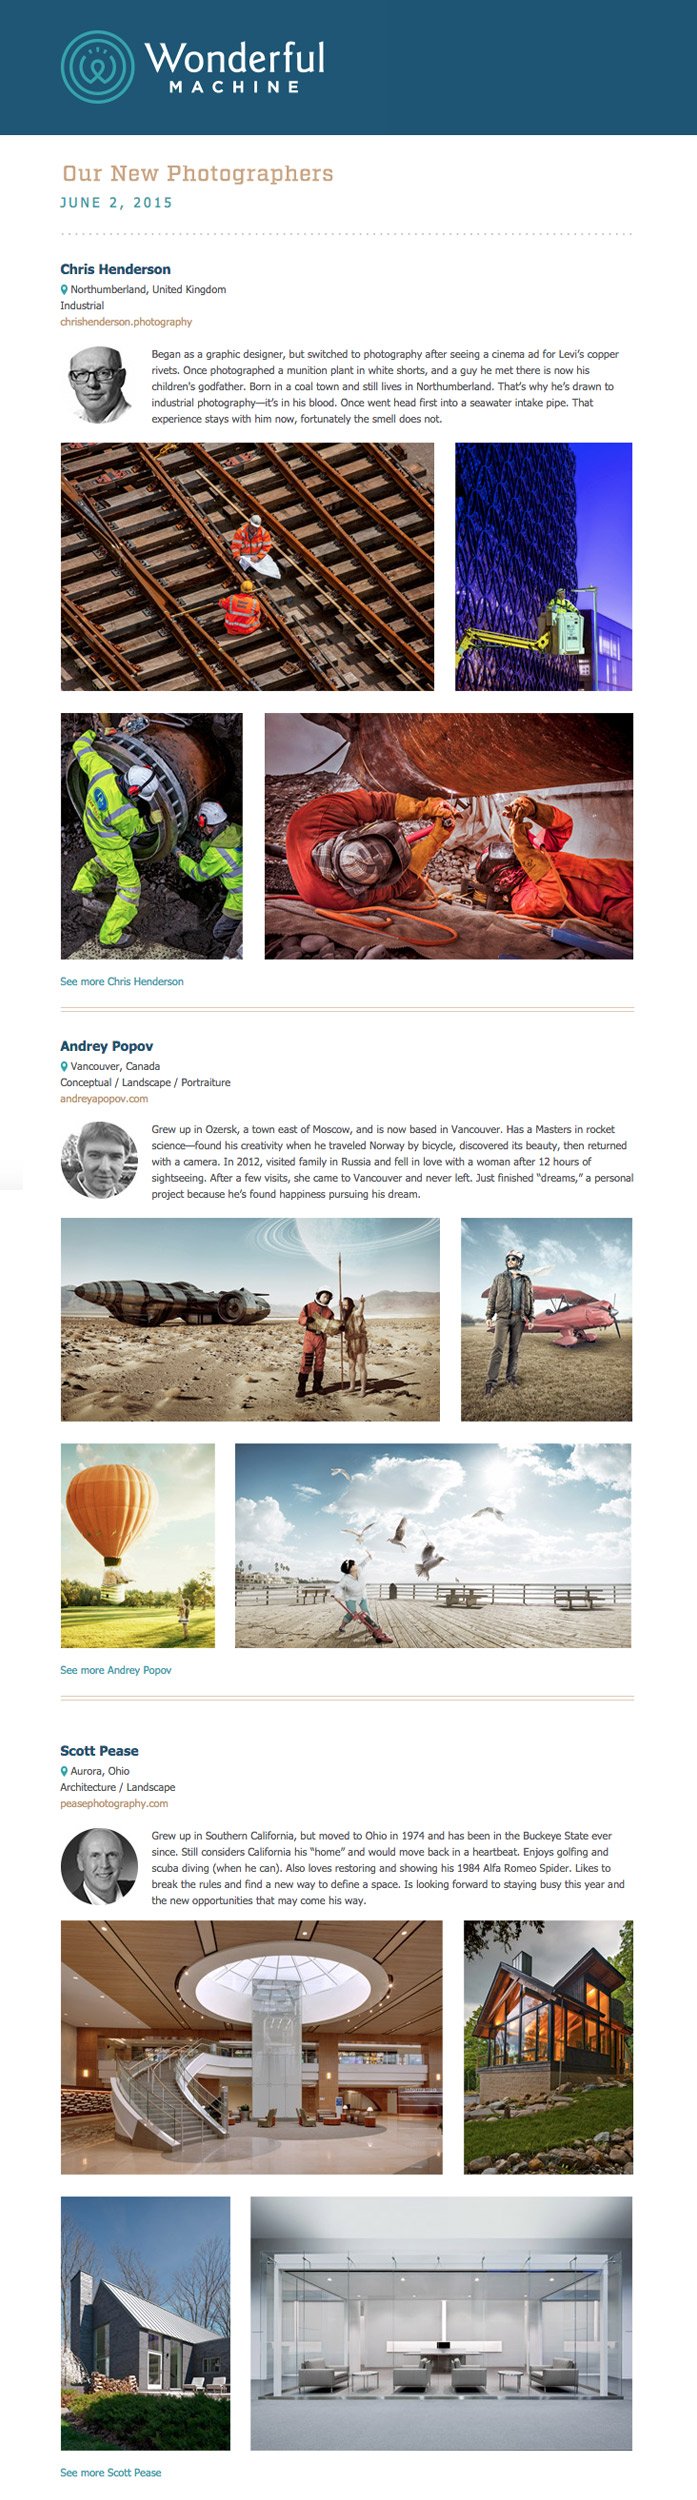 Emailers: June 2, 2015 showing new member photographers Chris Henderson, Andrey Popov and Scott Pease,